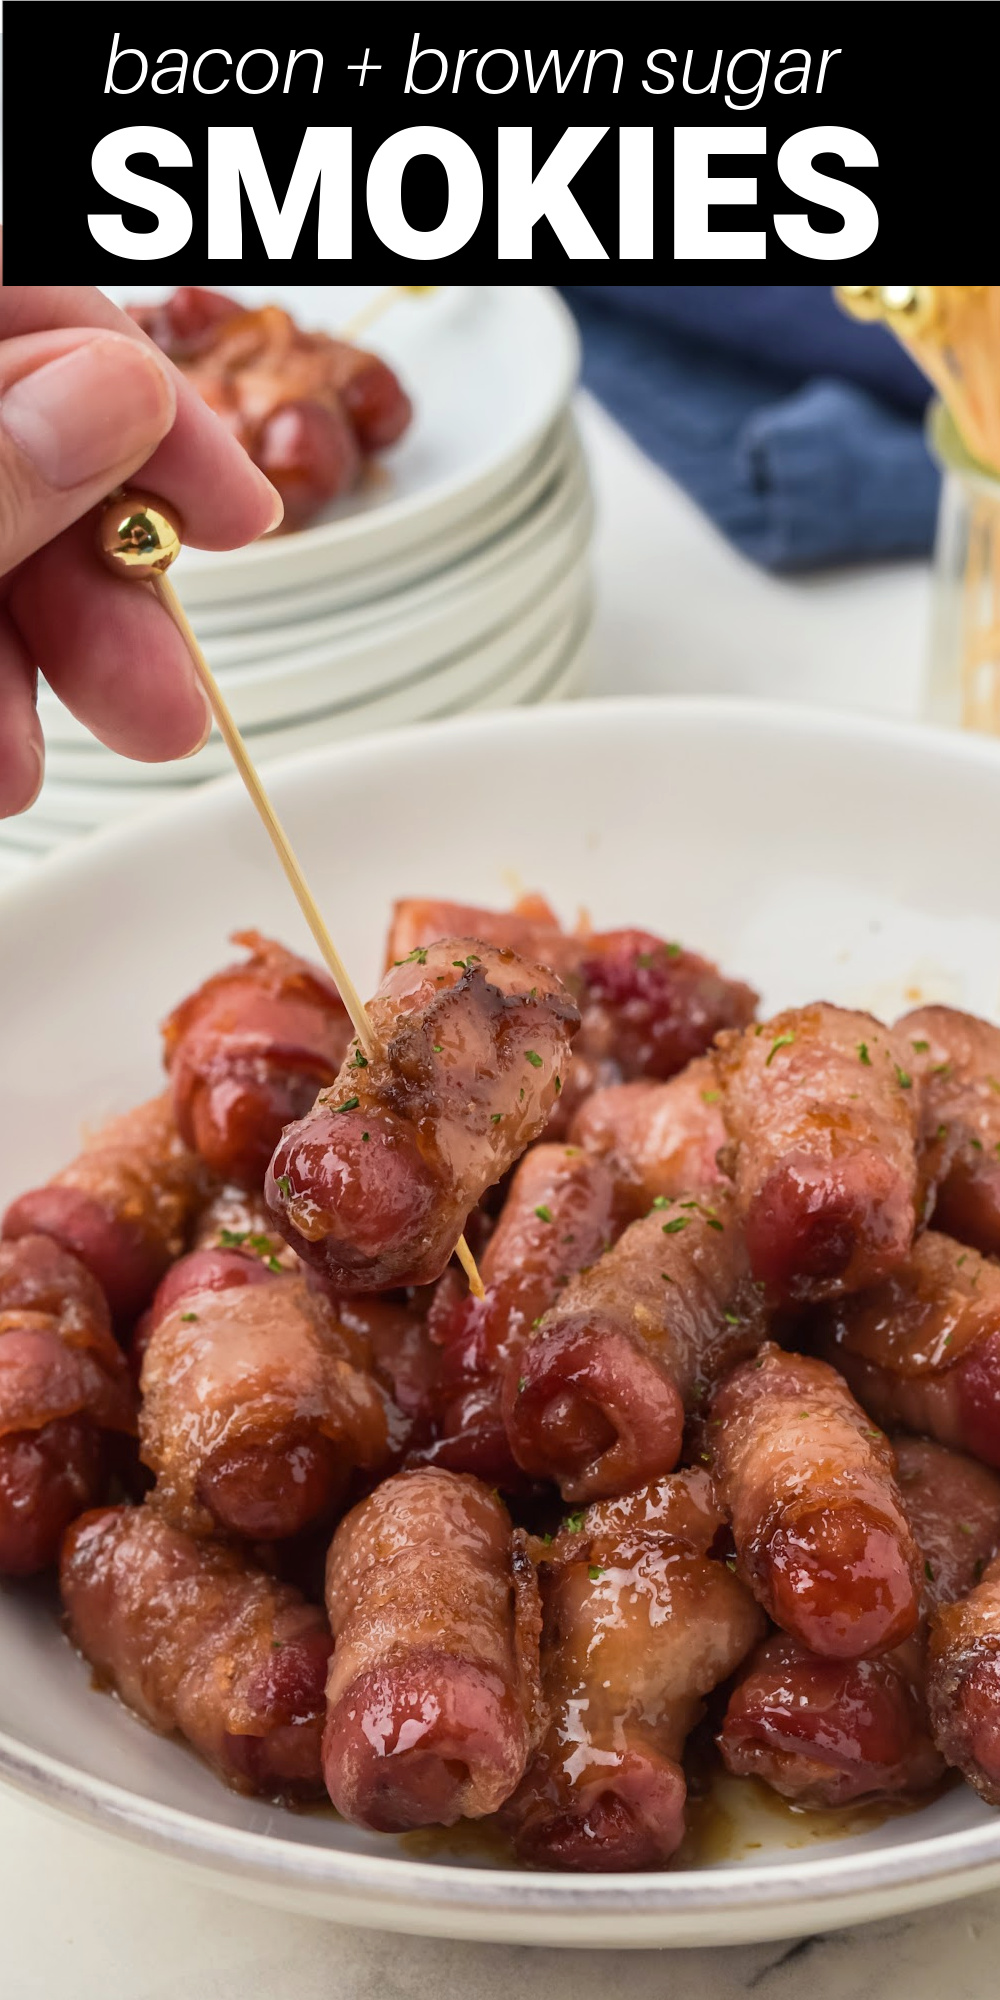 Made with just a few pantry ingredients these Bacon Wrapped Smokies with sweet brown sugar glaze are a sweet and smokie snack everyone loves! They are an absolute must for game day or your next party!